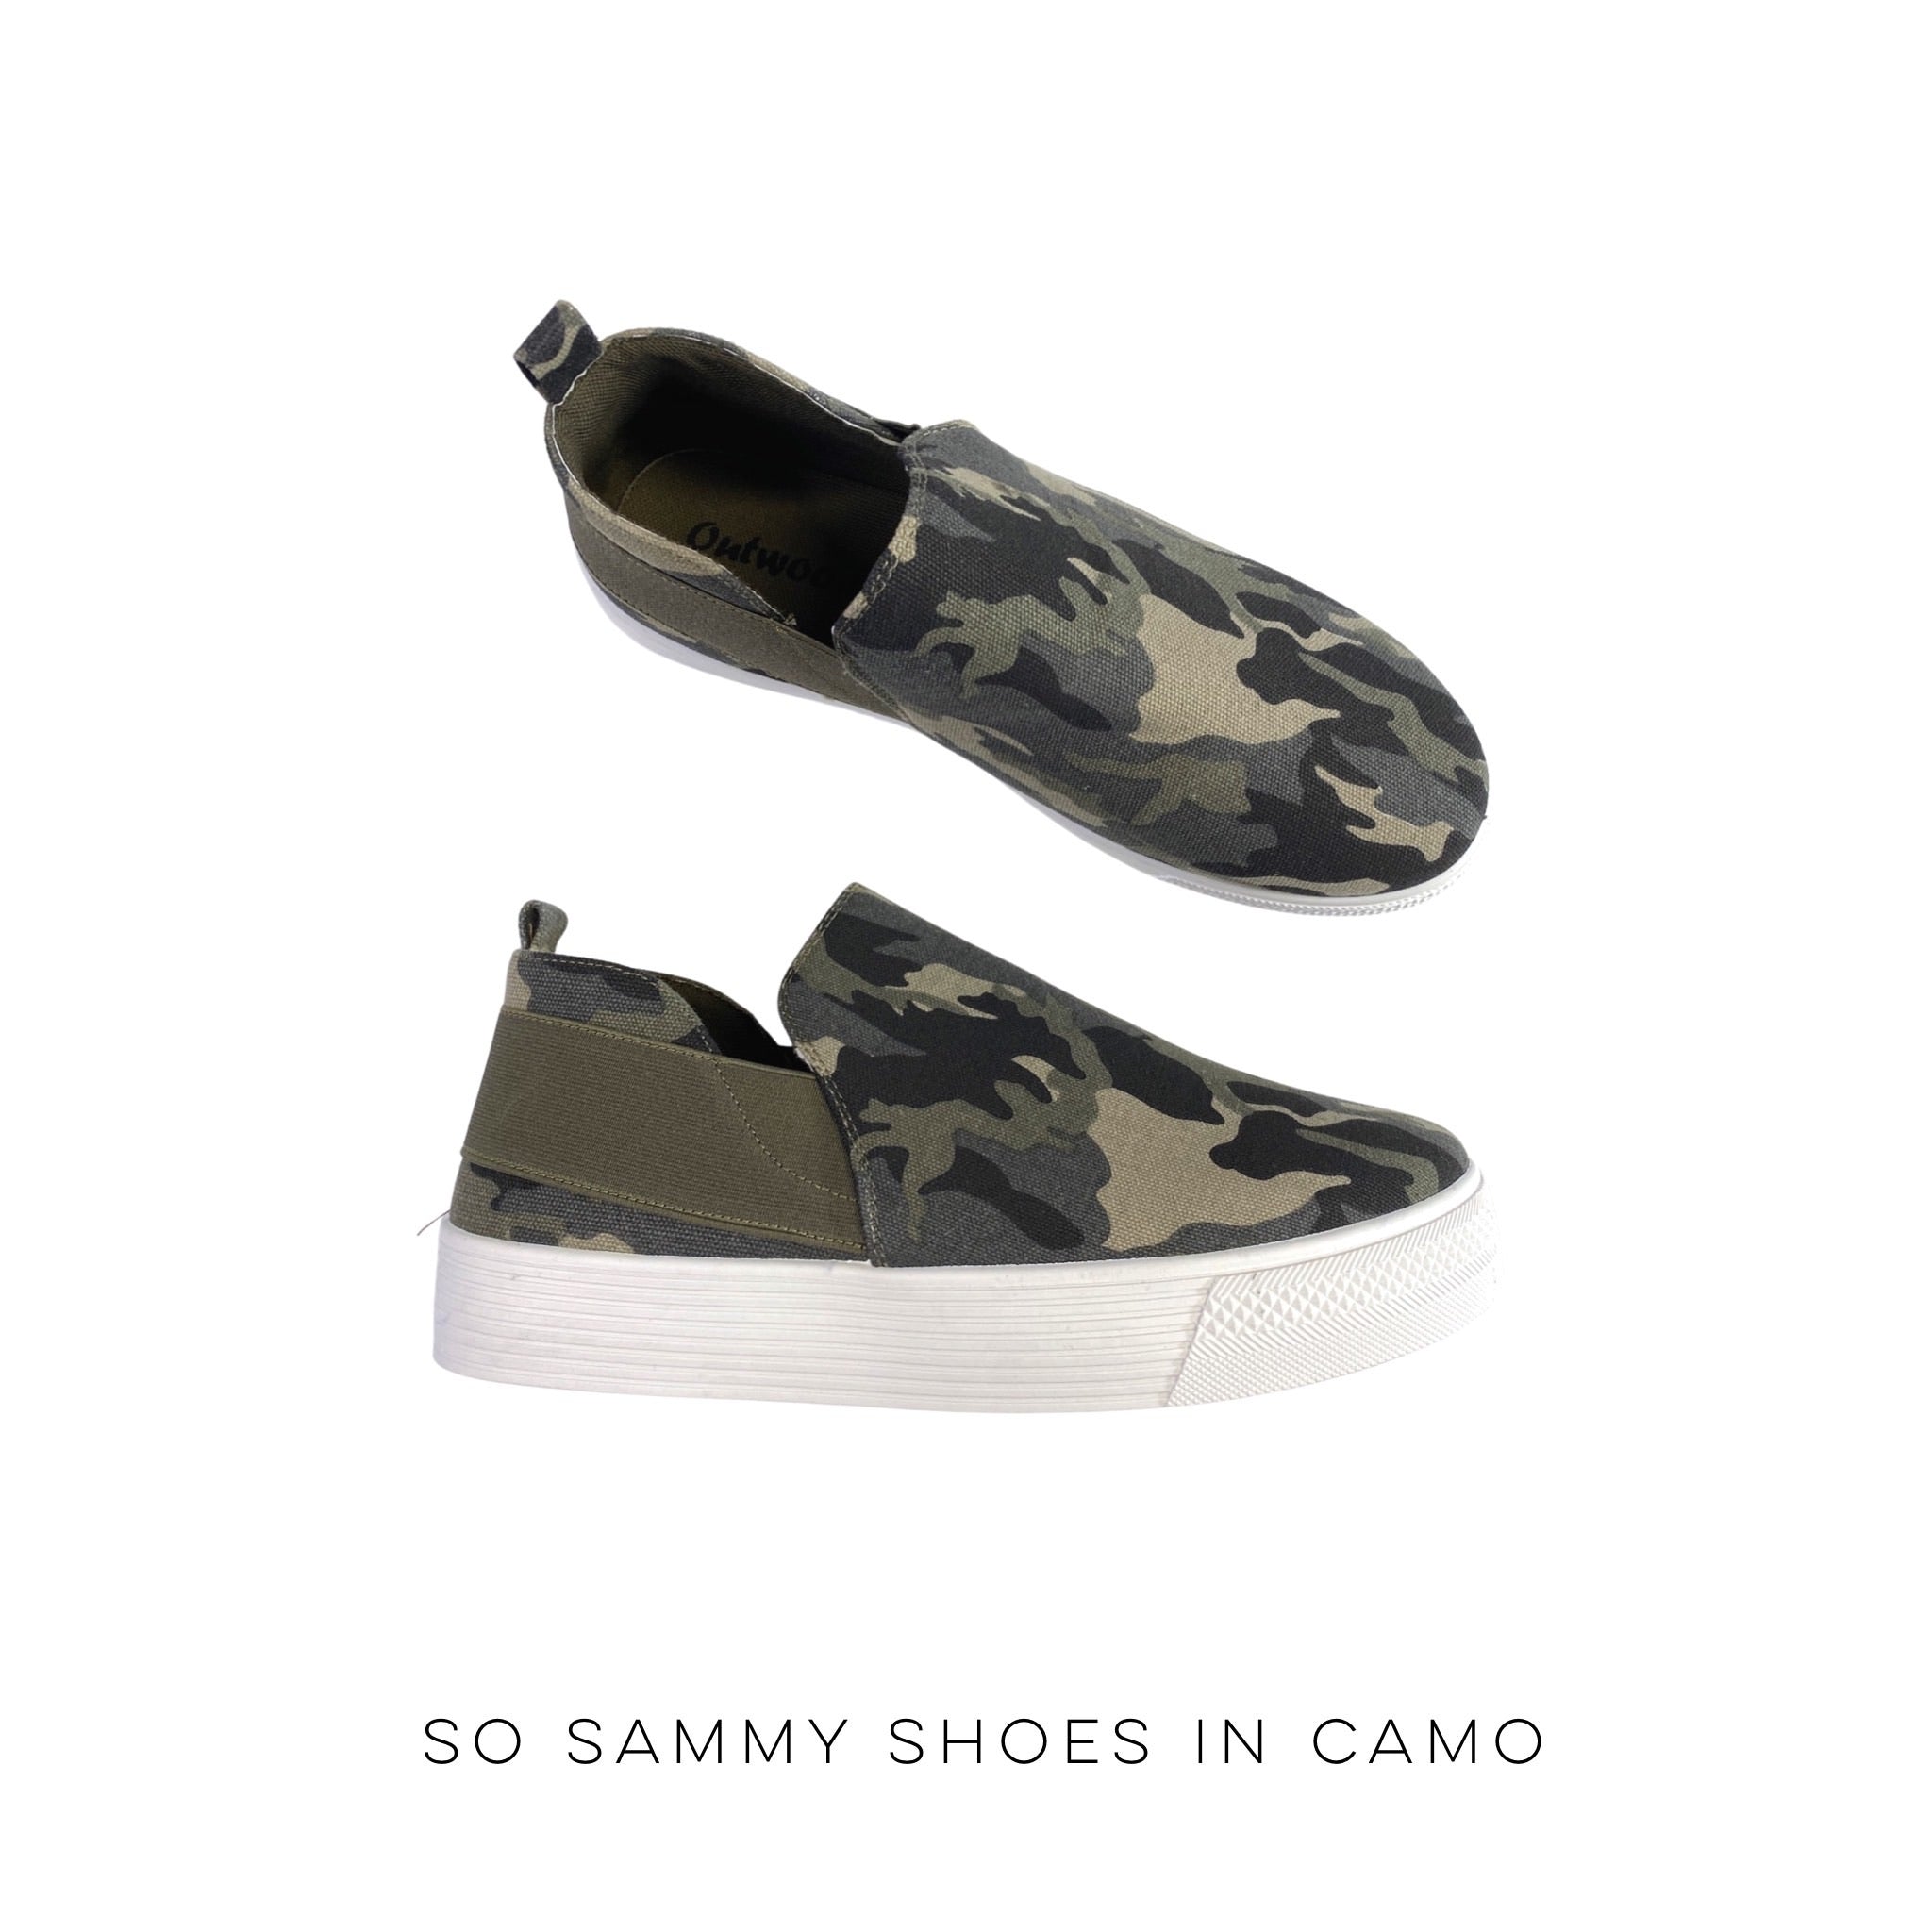 So Sammy Shoes in Camo